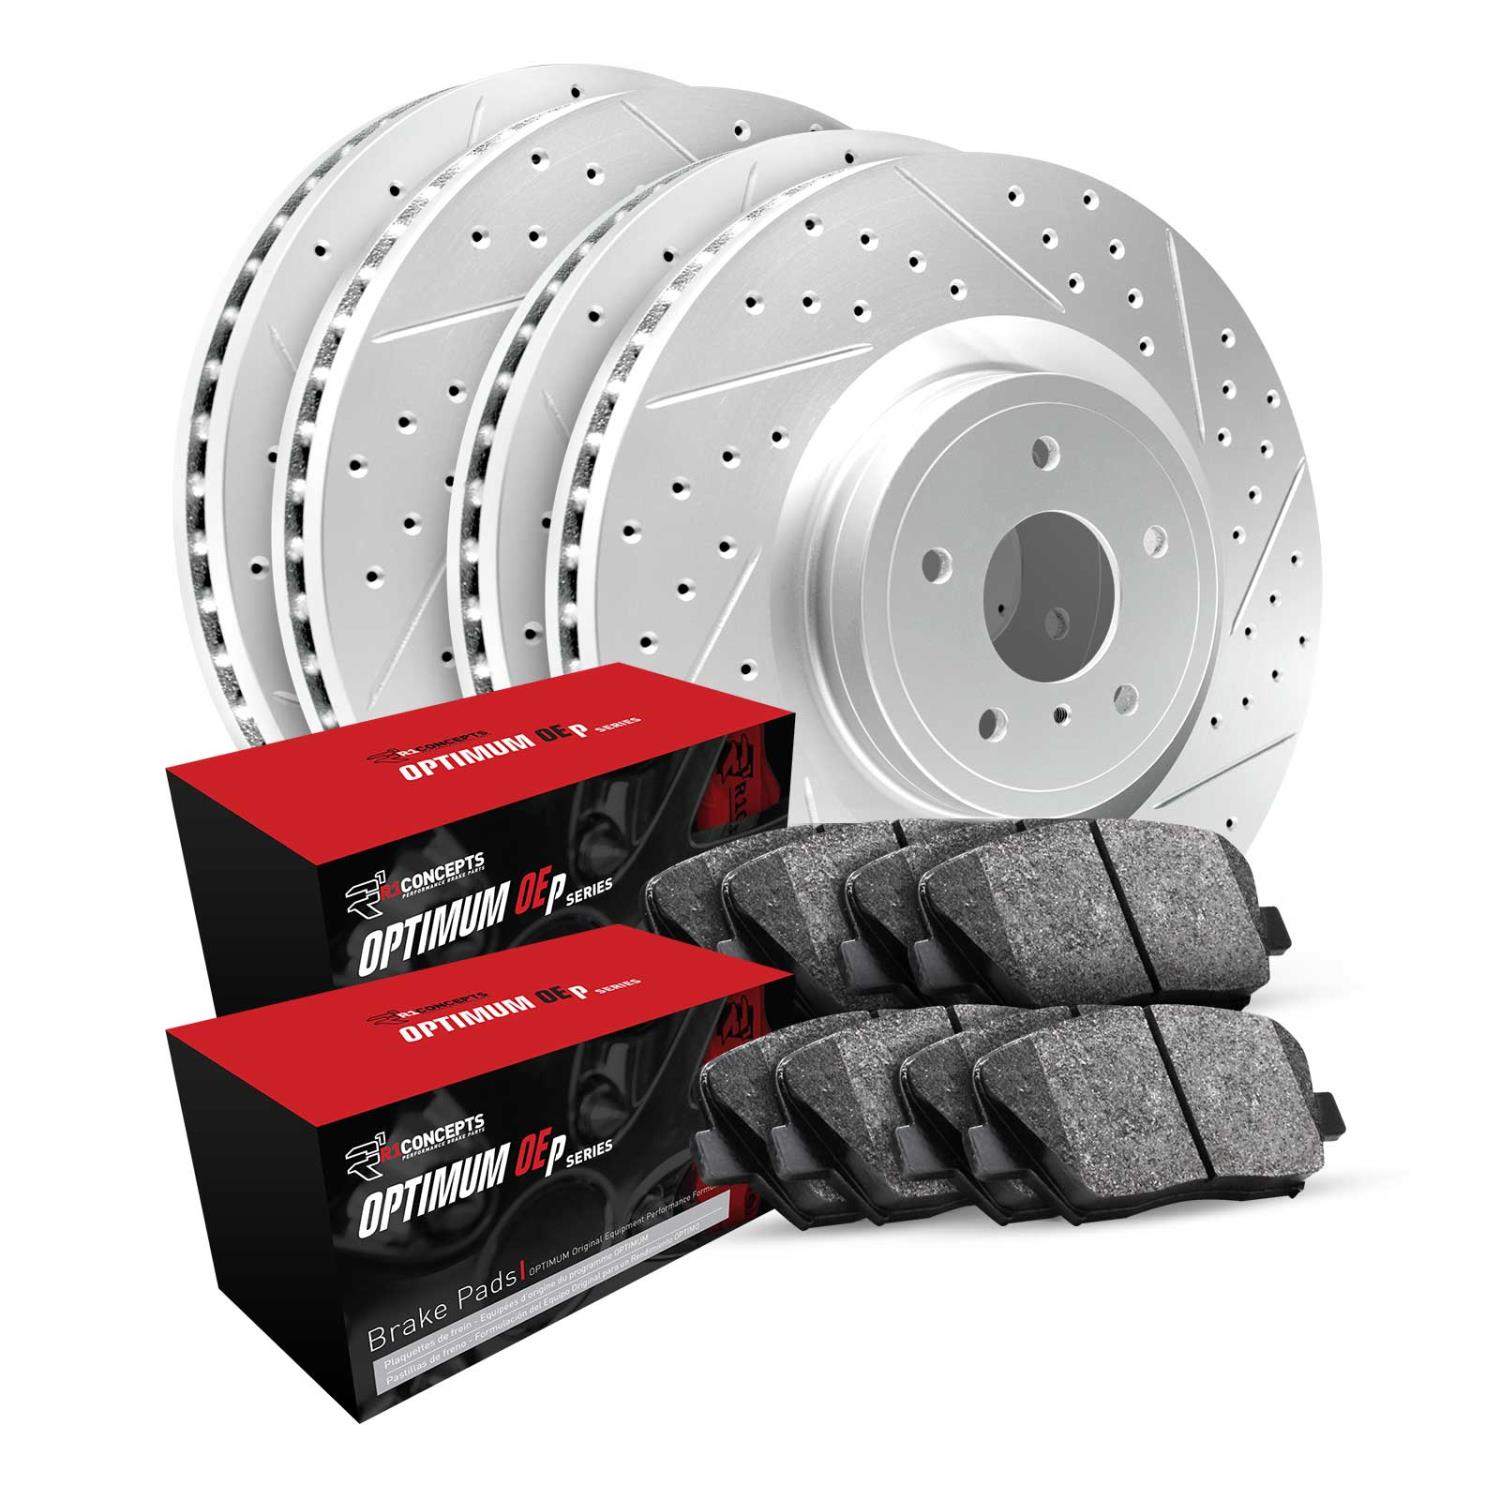 GEO-Carbon Drilled & Slotted Brake Rotor Set w/Optimum OE Pads, 2003-2008 Fits Multiple Makes/Models, Position: Rear